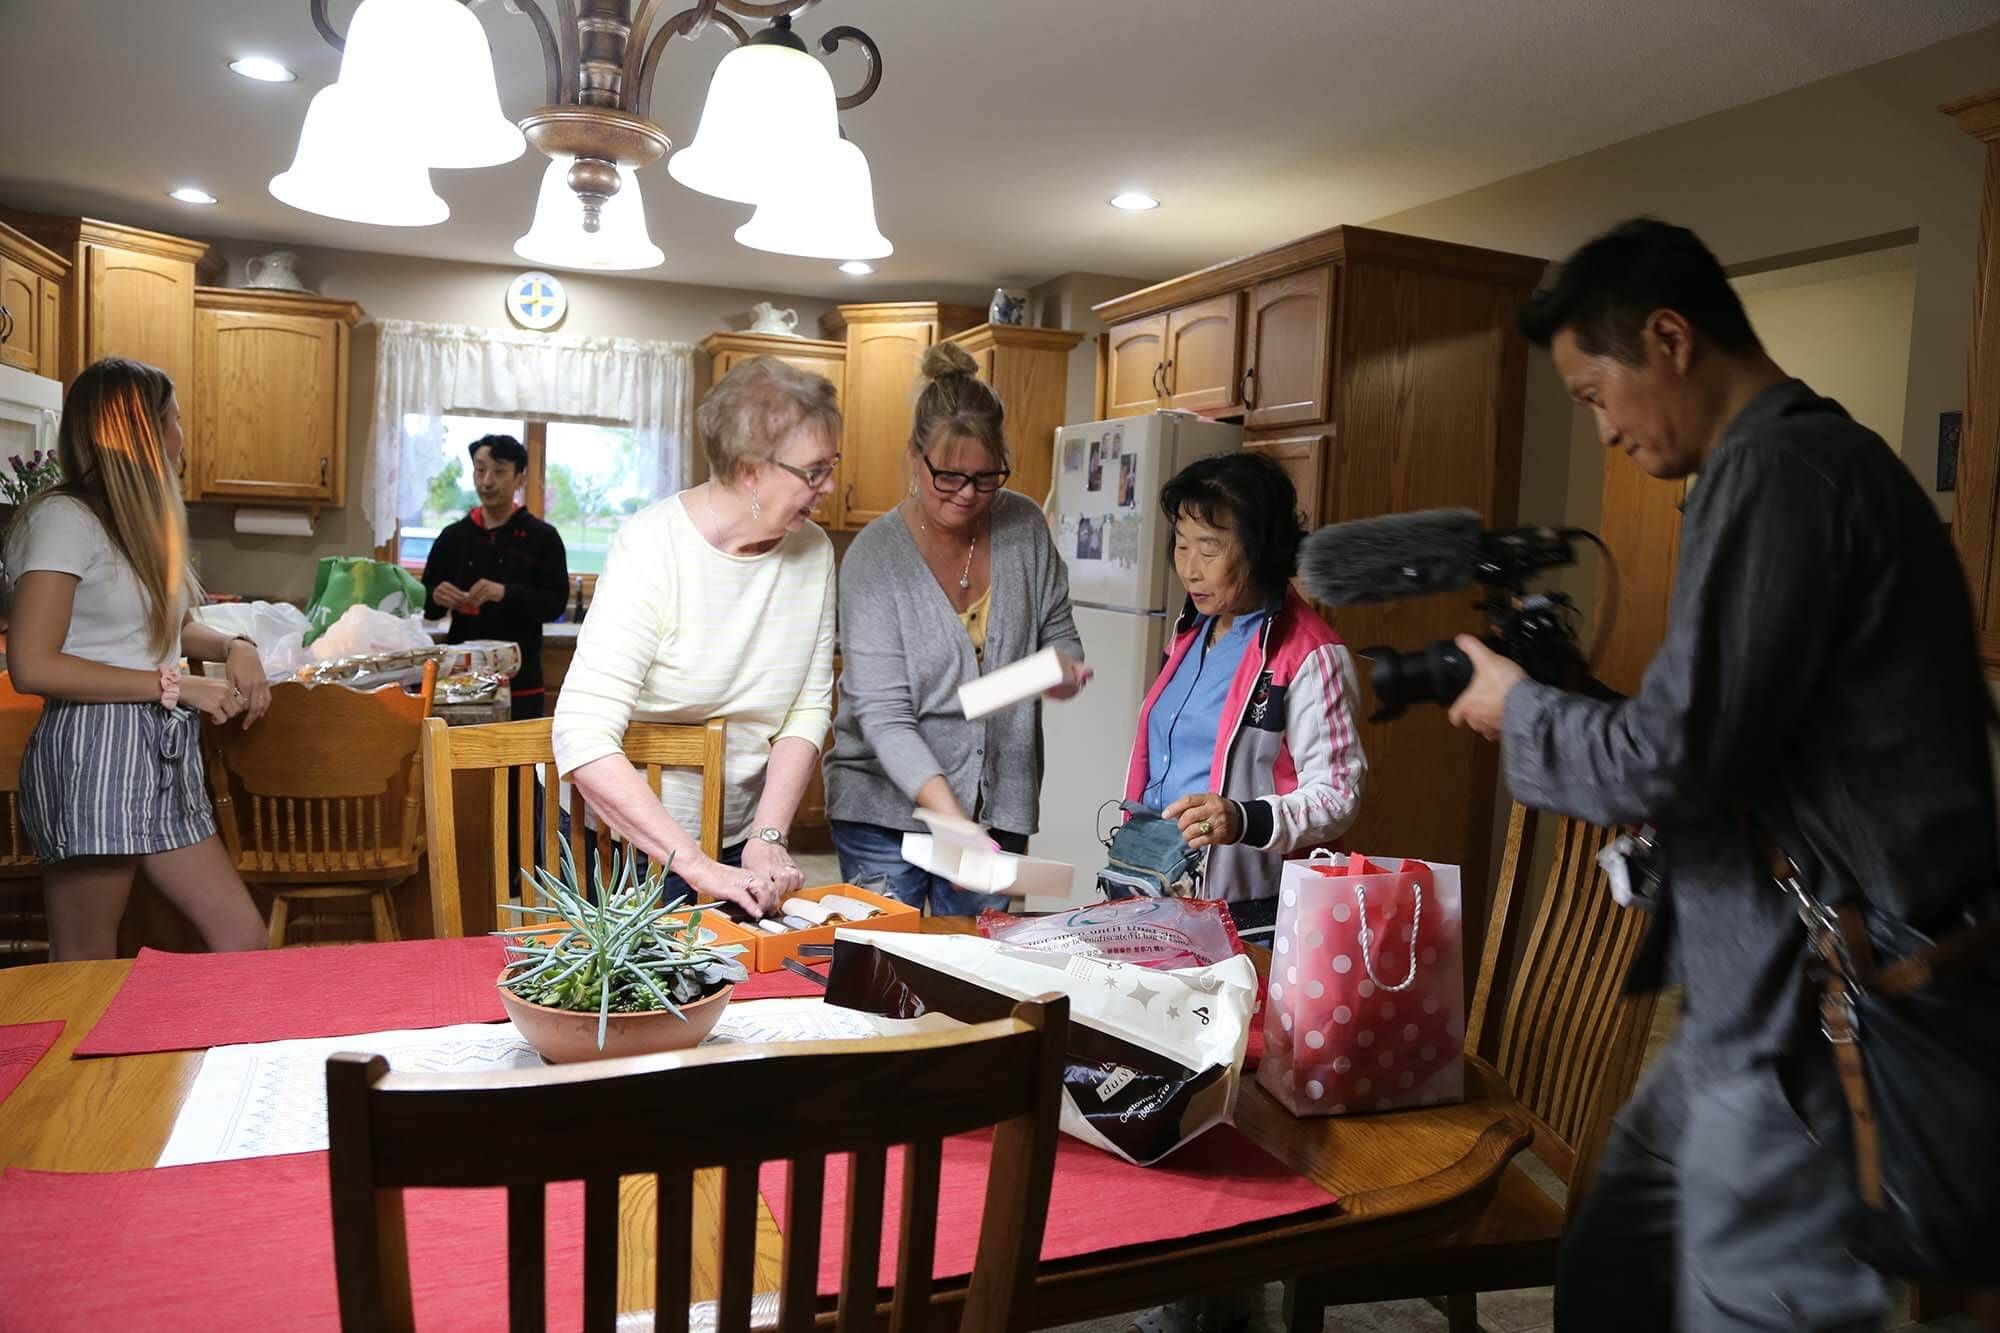 Fostervold's adoptive mother and sister Lynn Wells, 51, exchange gifts with his biological mother, as Korean filmmaker Wangmo Yeon captures the moment.